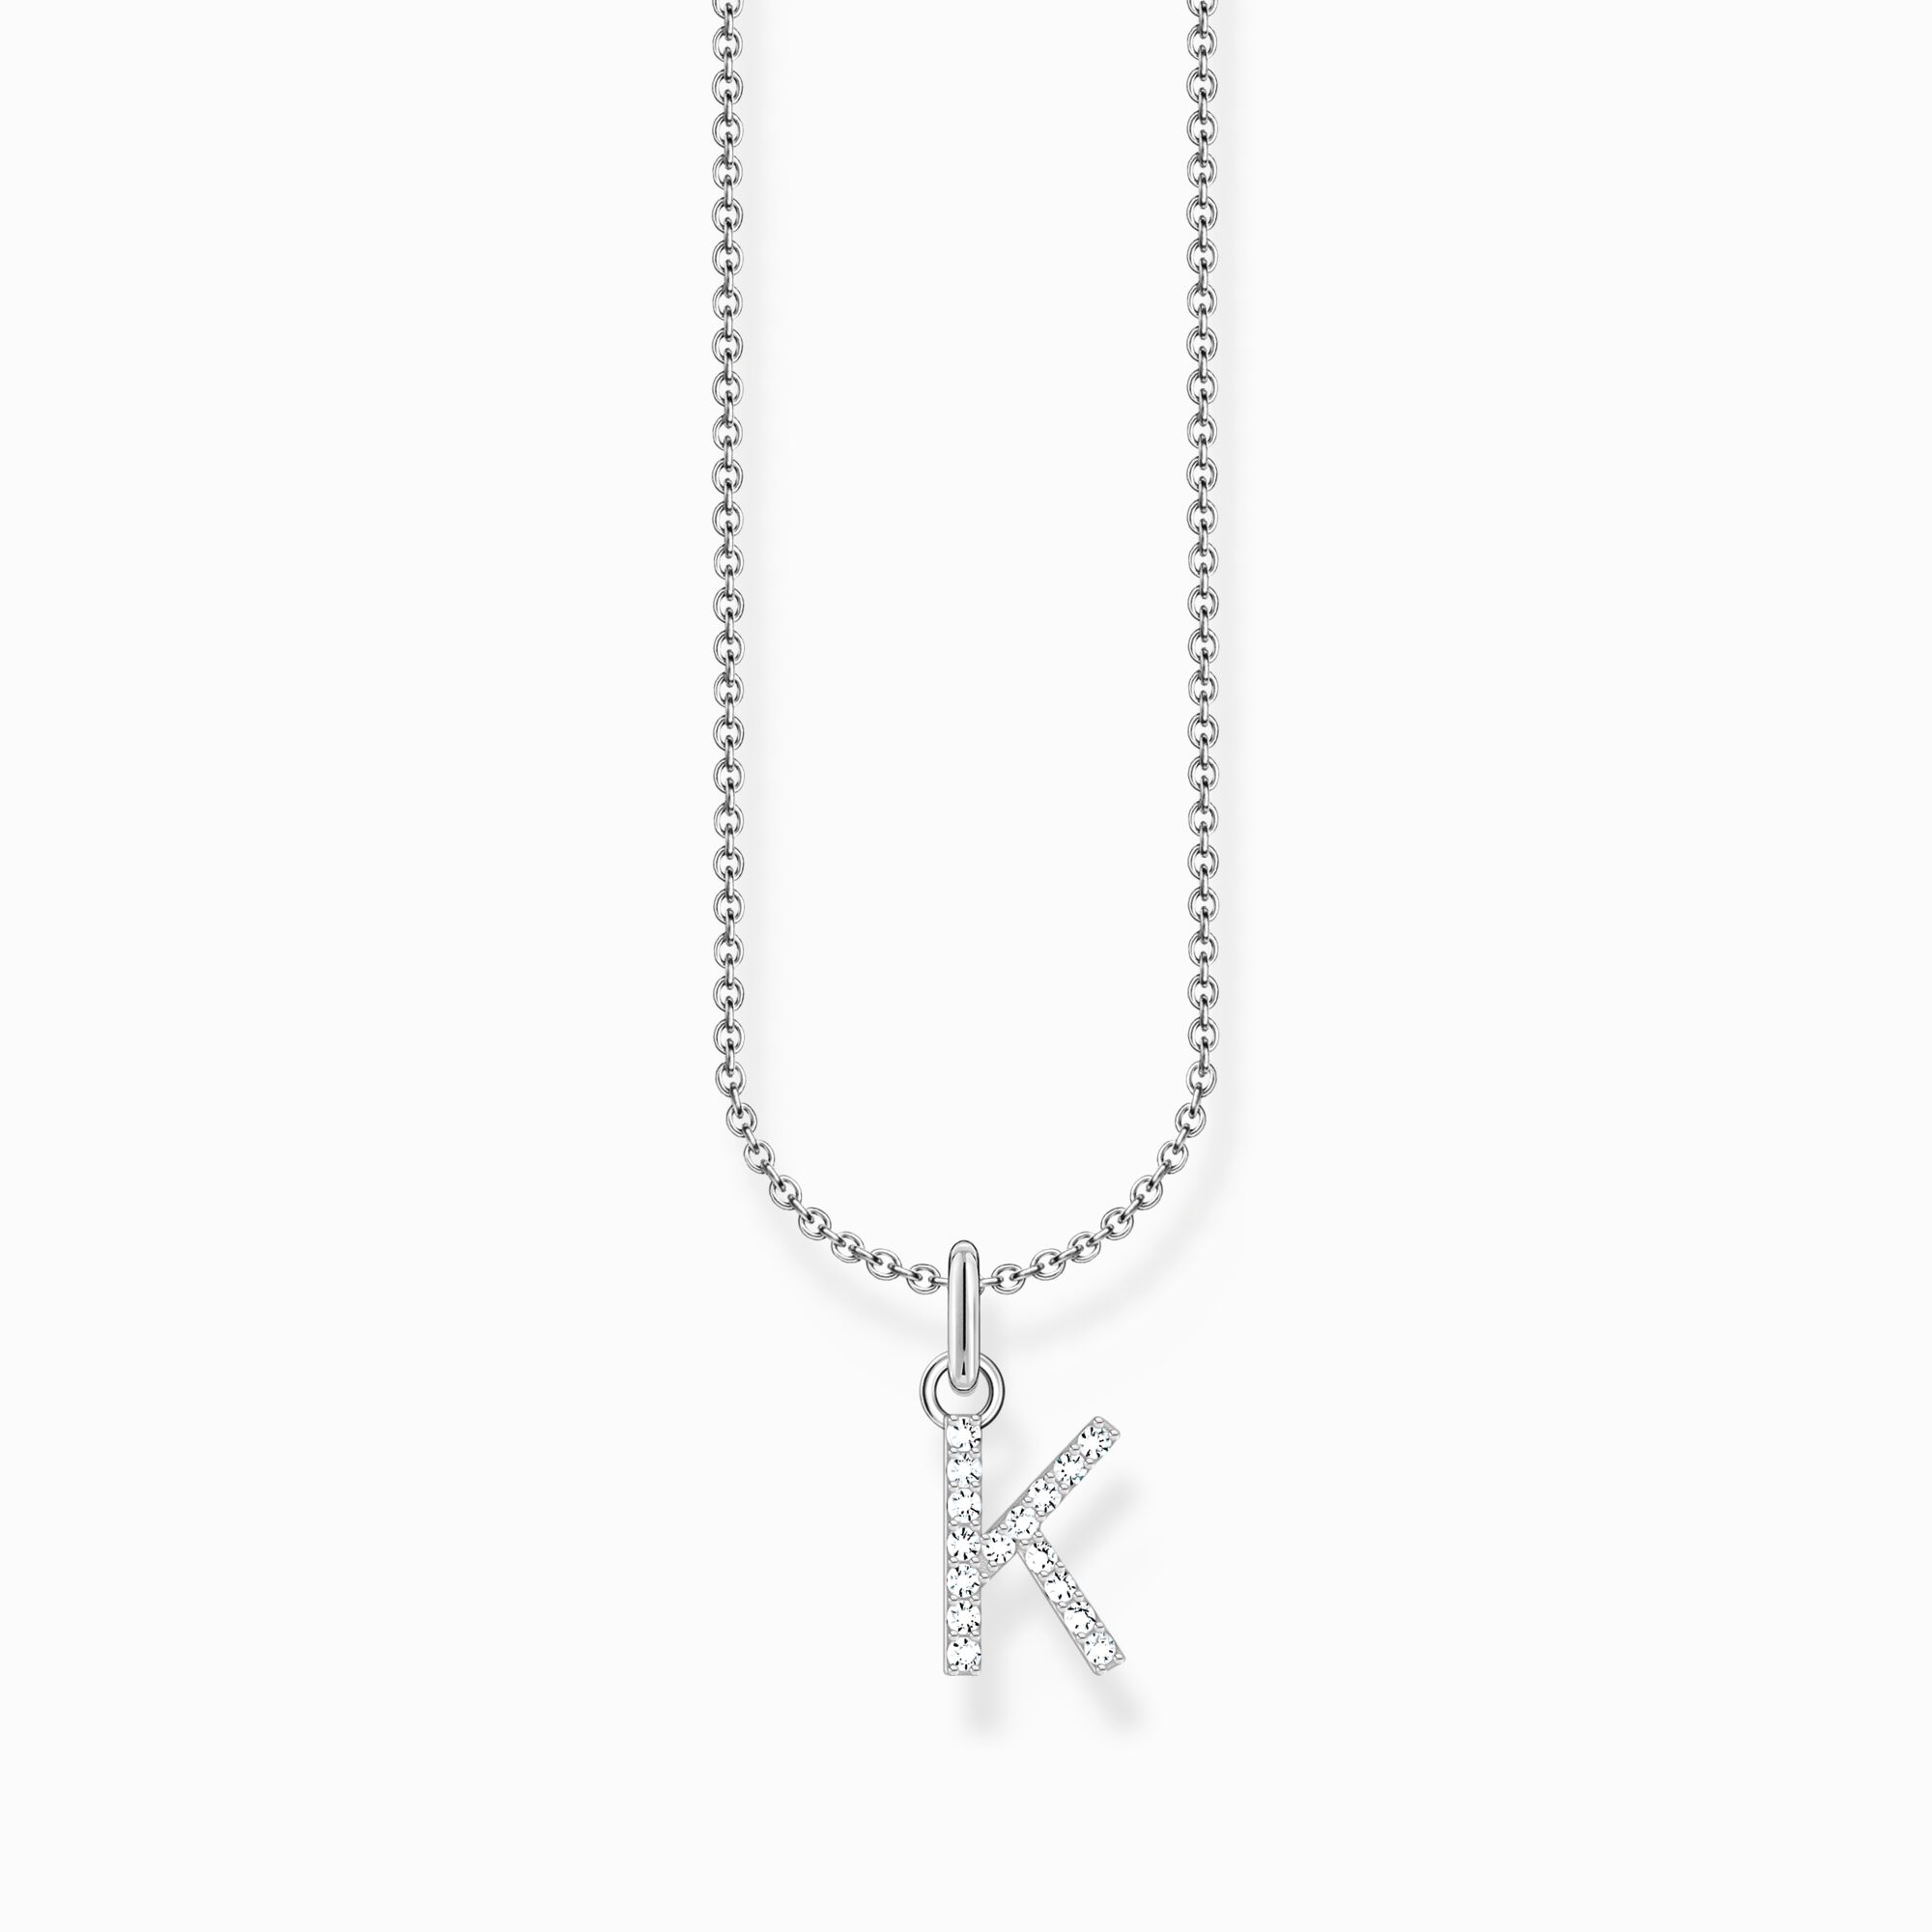 Silver necklace with letter pendant K and white zirconia from the Charming Collection collection in the THOMAS SABO online store